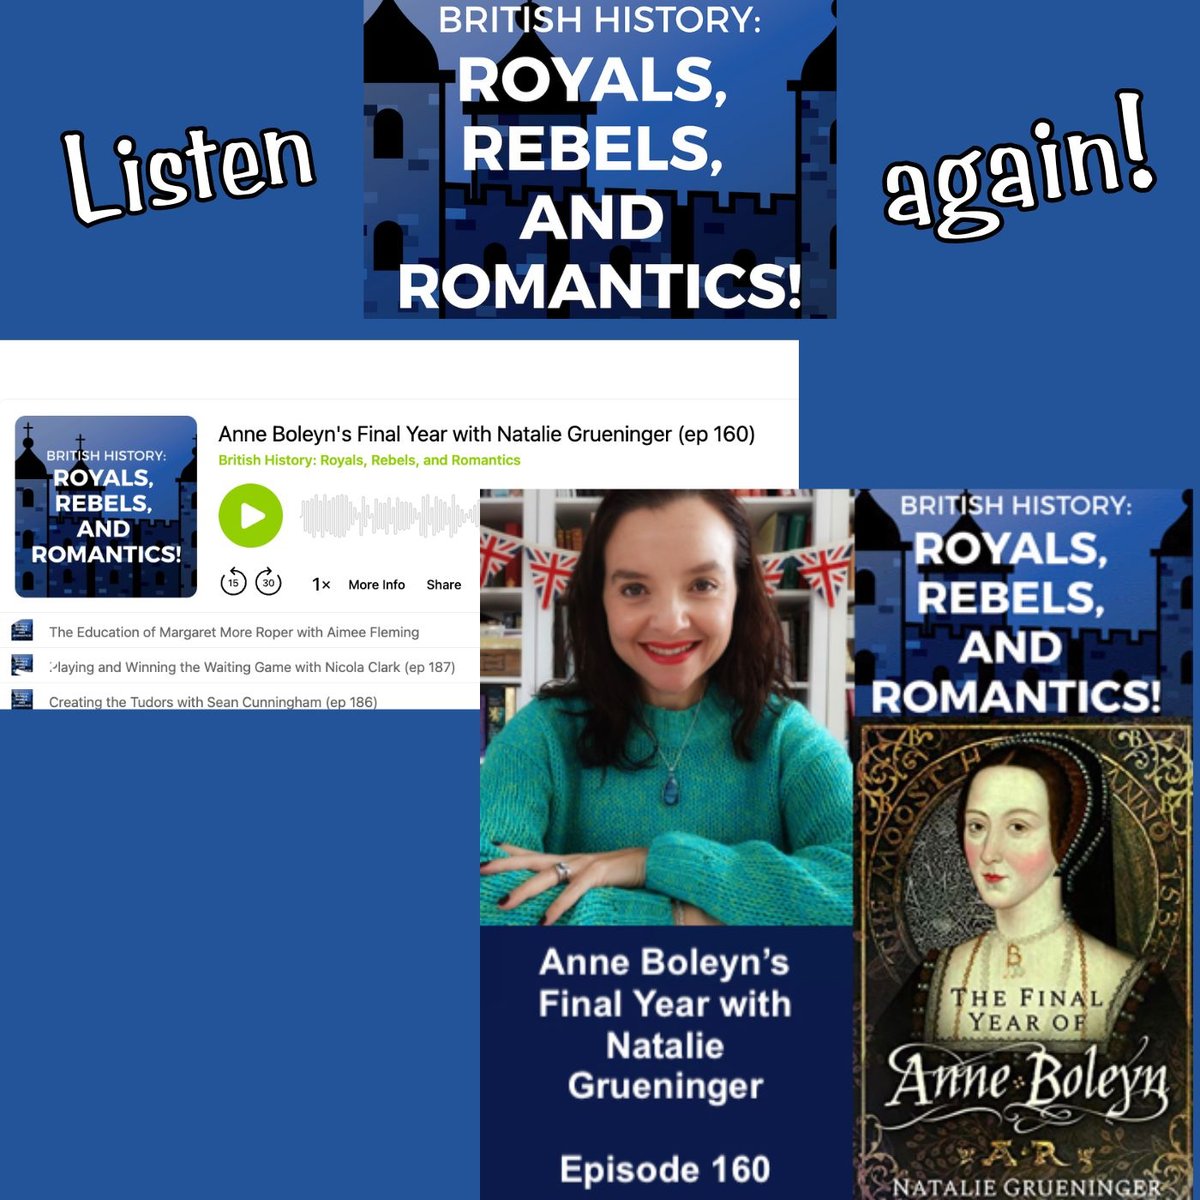 As all us #Tudornerds know, it's Anne Boleyn month. So what better time to have another listen as the brilliant #NatalieGrueninger ❤️ discusses her book with me! @OntheTudorTrail bit.ly/RRRepisodes bit.ly/youtubeRRR